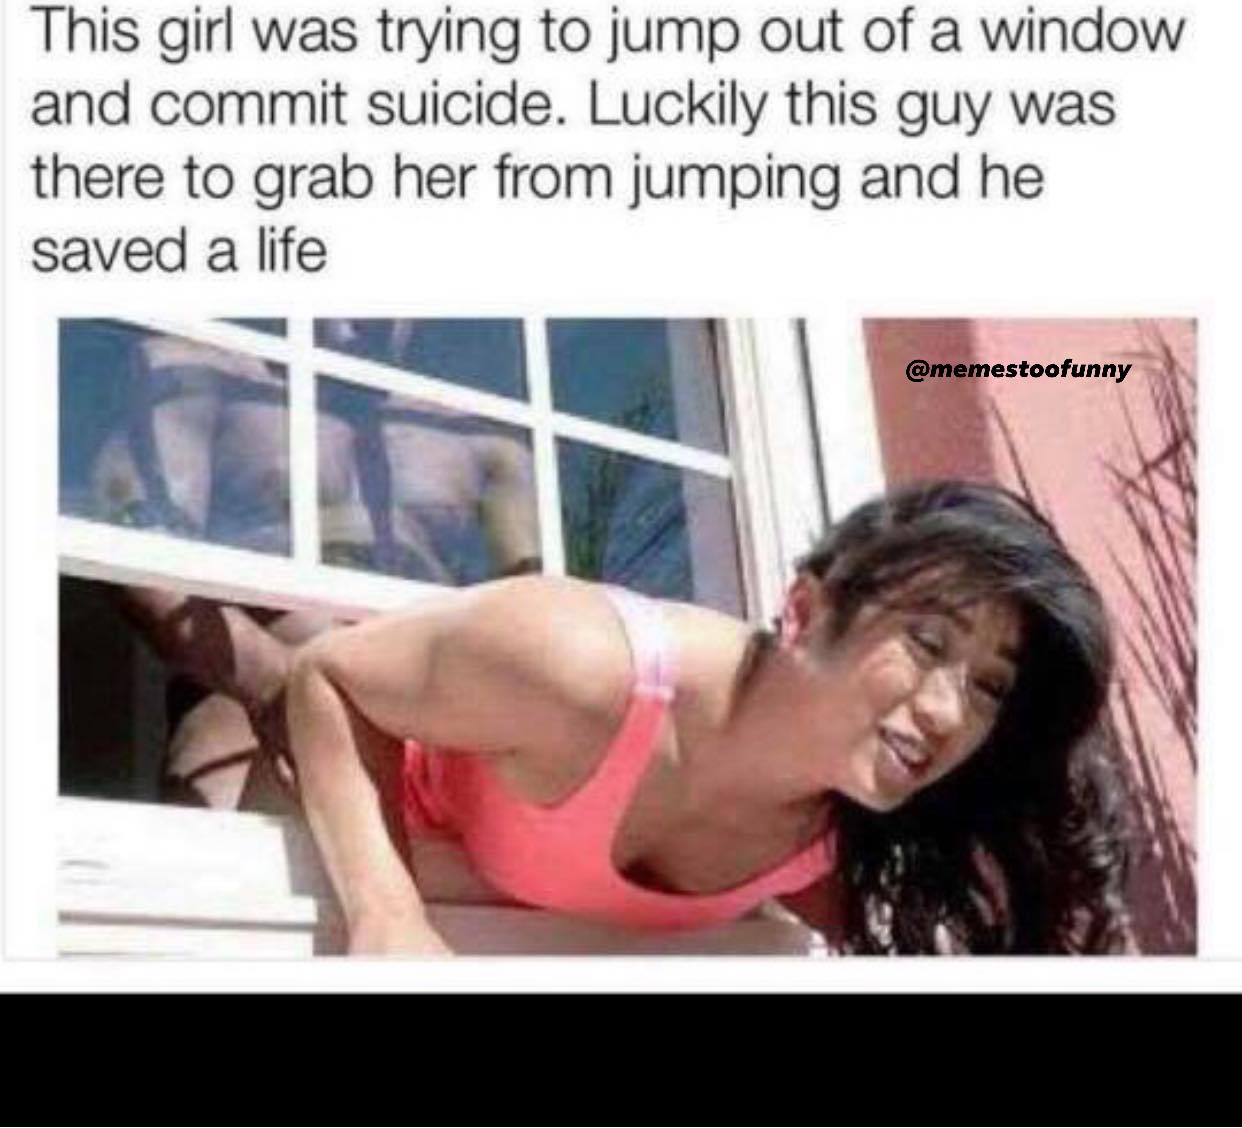 muscle - This girl was trying to jump out of a window and commit suicide. Luckily this guy was there to grab her from jumping and he saved a life